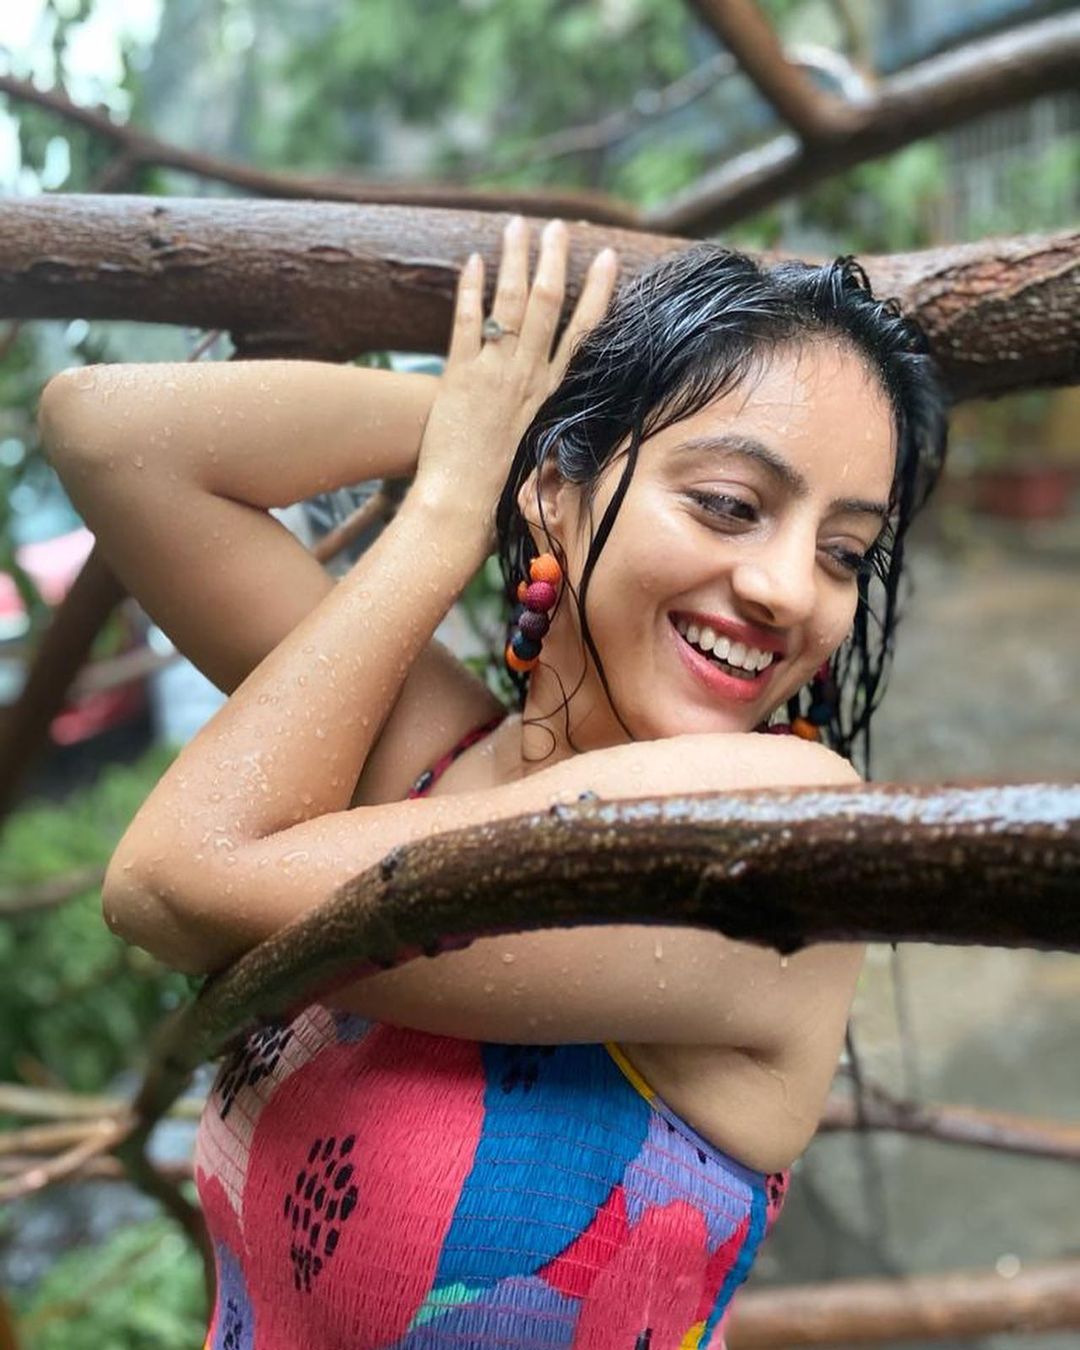 Deepika Singh poses beside tree uprooted by Cyclone Tauktae.